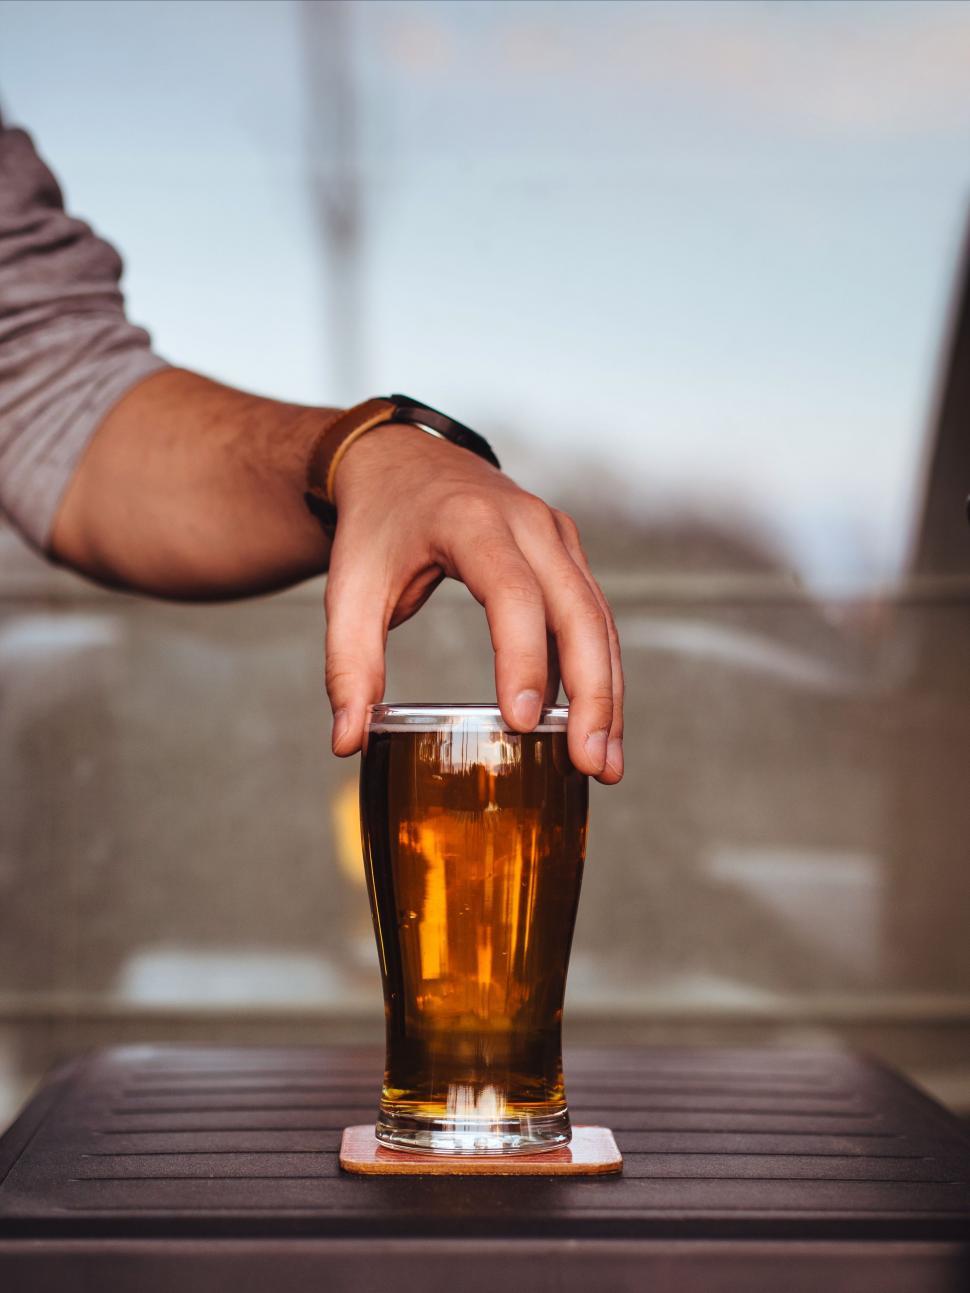 Free Image of Man Holding Glass of Beer on Table 